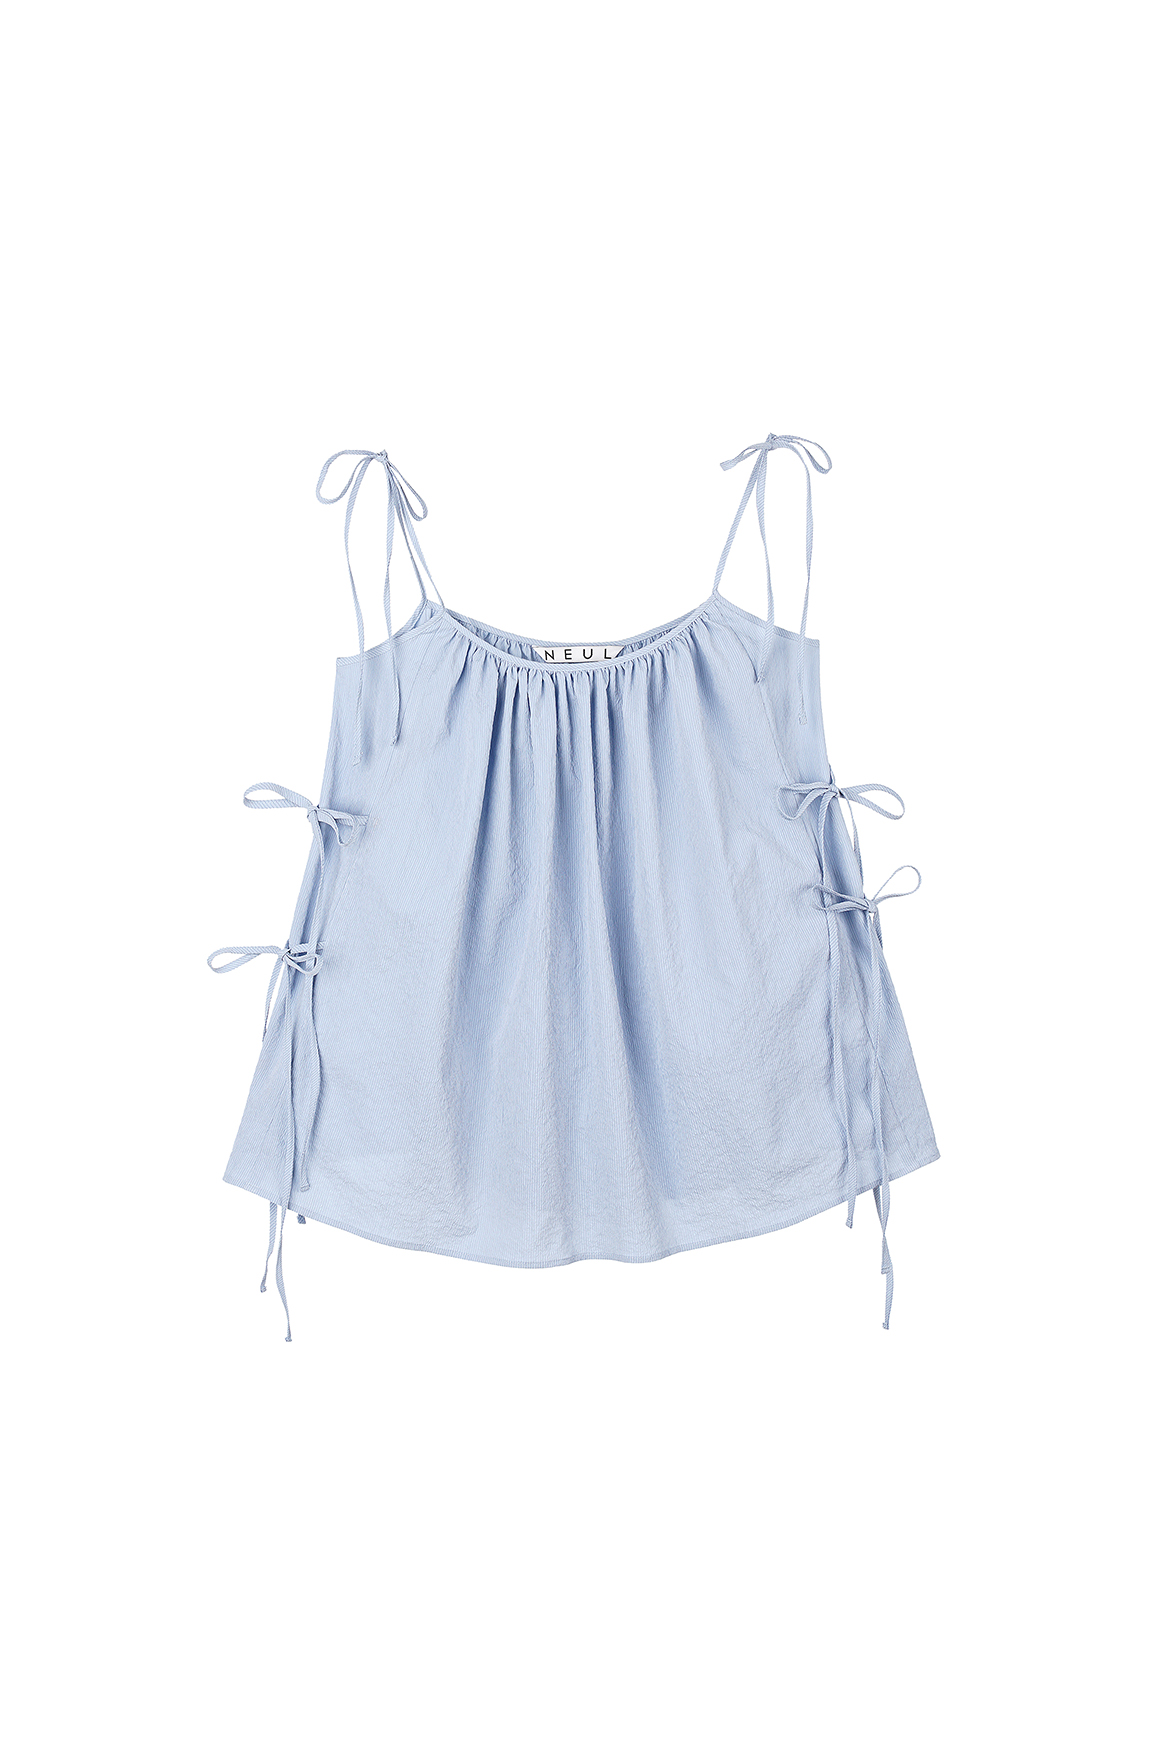 Coral Reef Sleeveless Top_Sky Blue